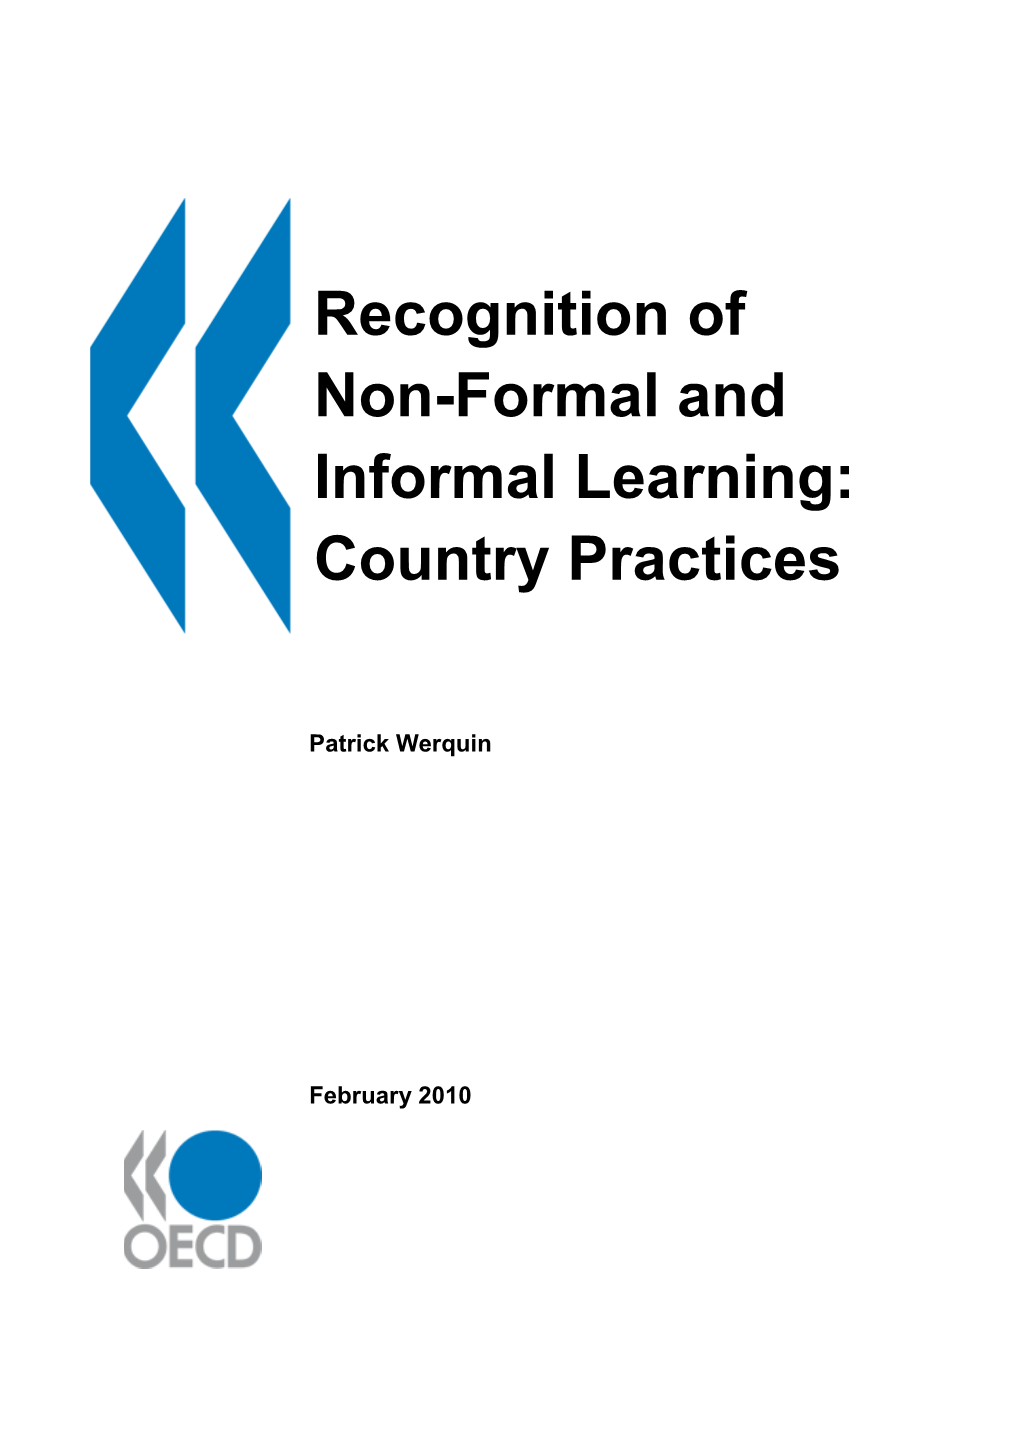 Recognition of Non-Formal and Informal Learning: Country Practices